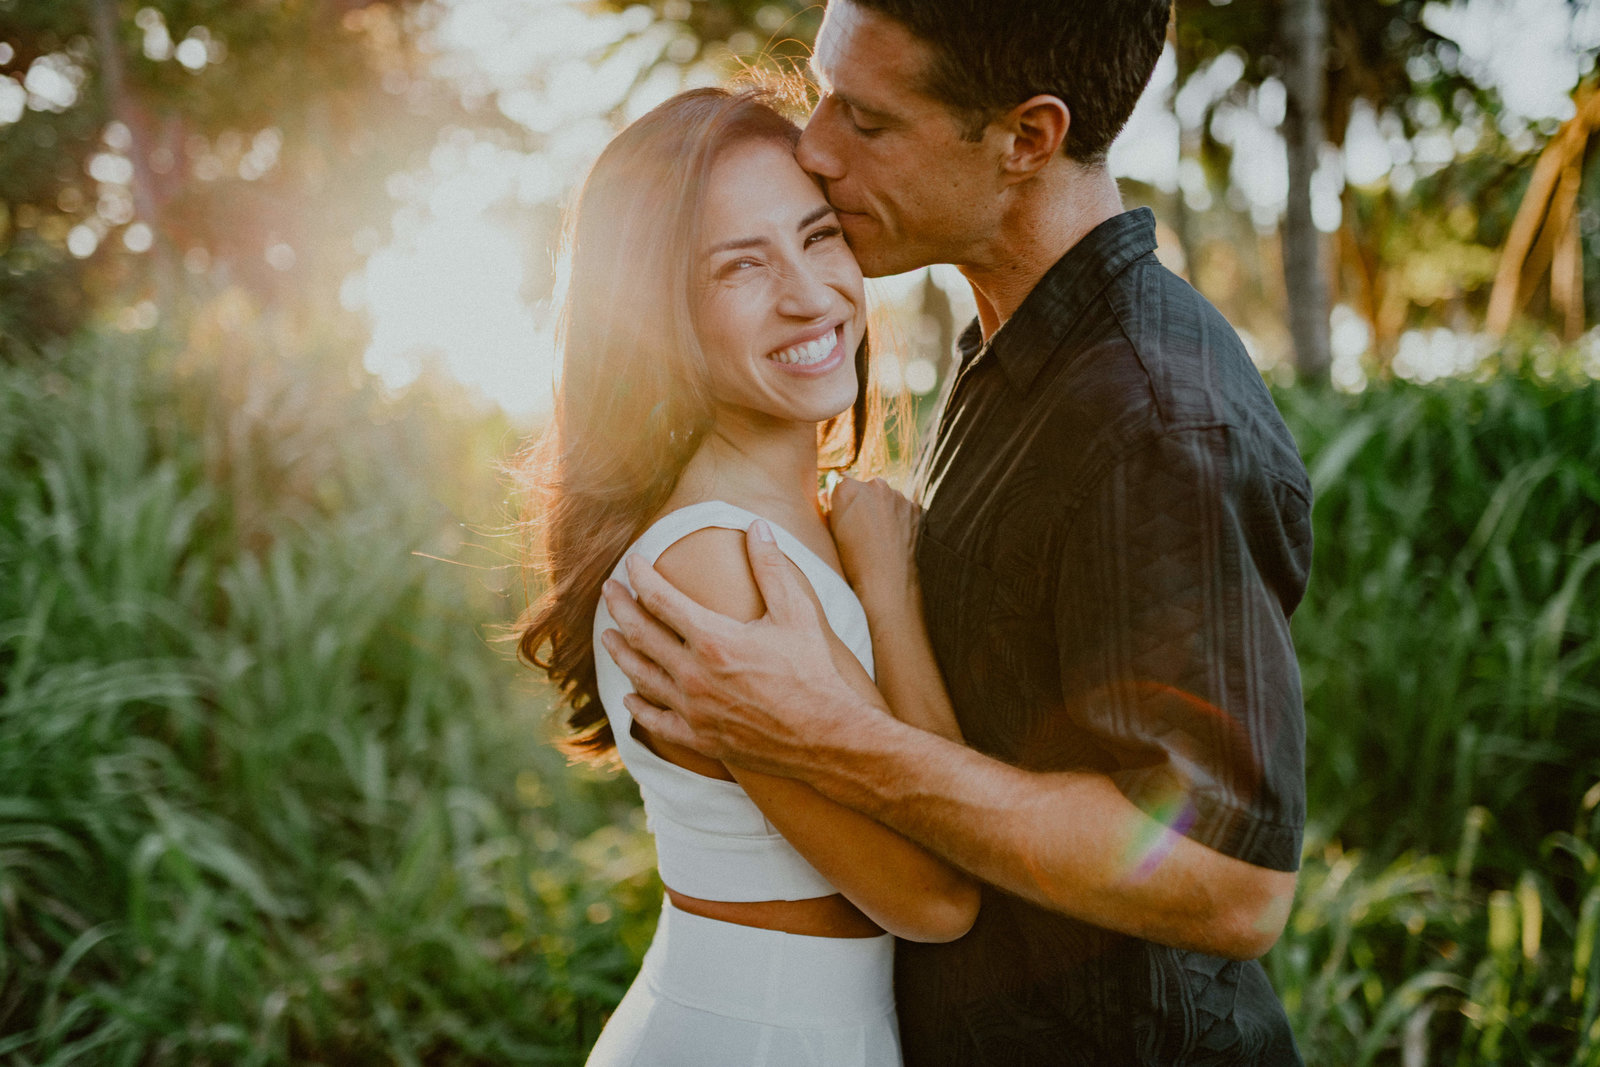 dillingham-ranch-engagement-oahu-hawaii-chelsea-abril-photography-6556